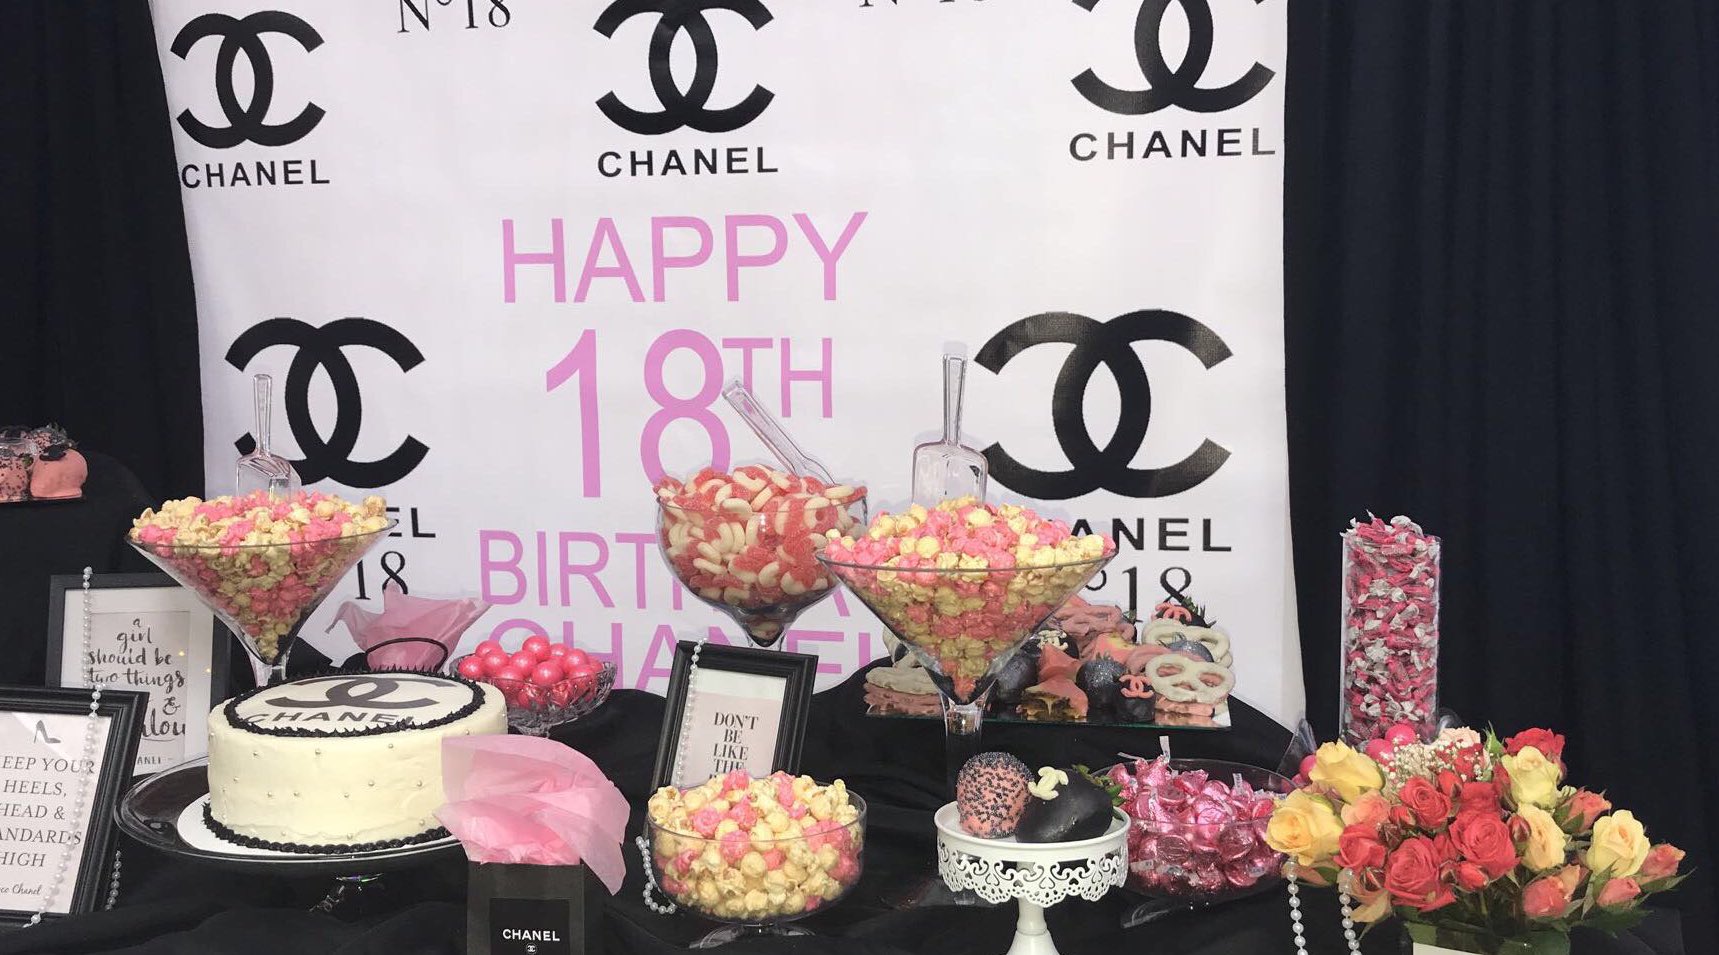 Candygirl Creations on X: #chanel 18th Birthday dinner #simple lay  #cocochanel #flowers #pearls #diamonds #18thbirthday loving my perfume  #centerpieces #eventstyling #decor #decoration #chaneldecor #chaneldetails  #pink #chanelbirthday #candygirl